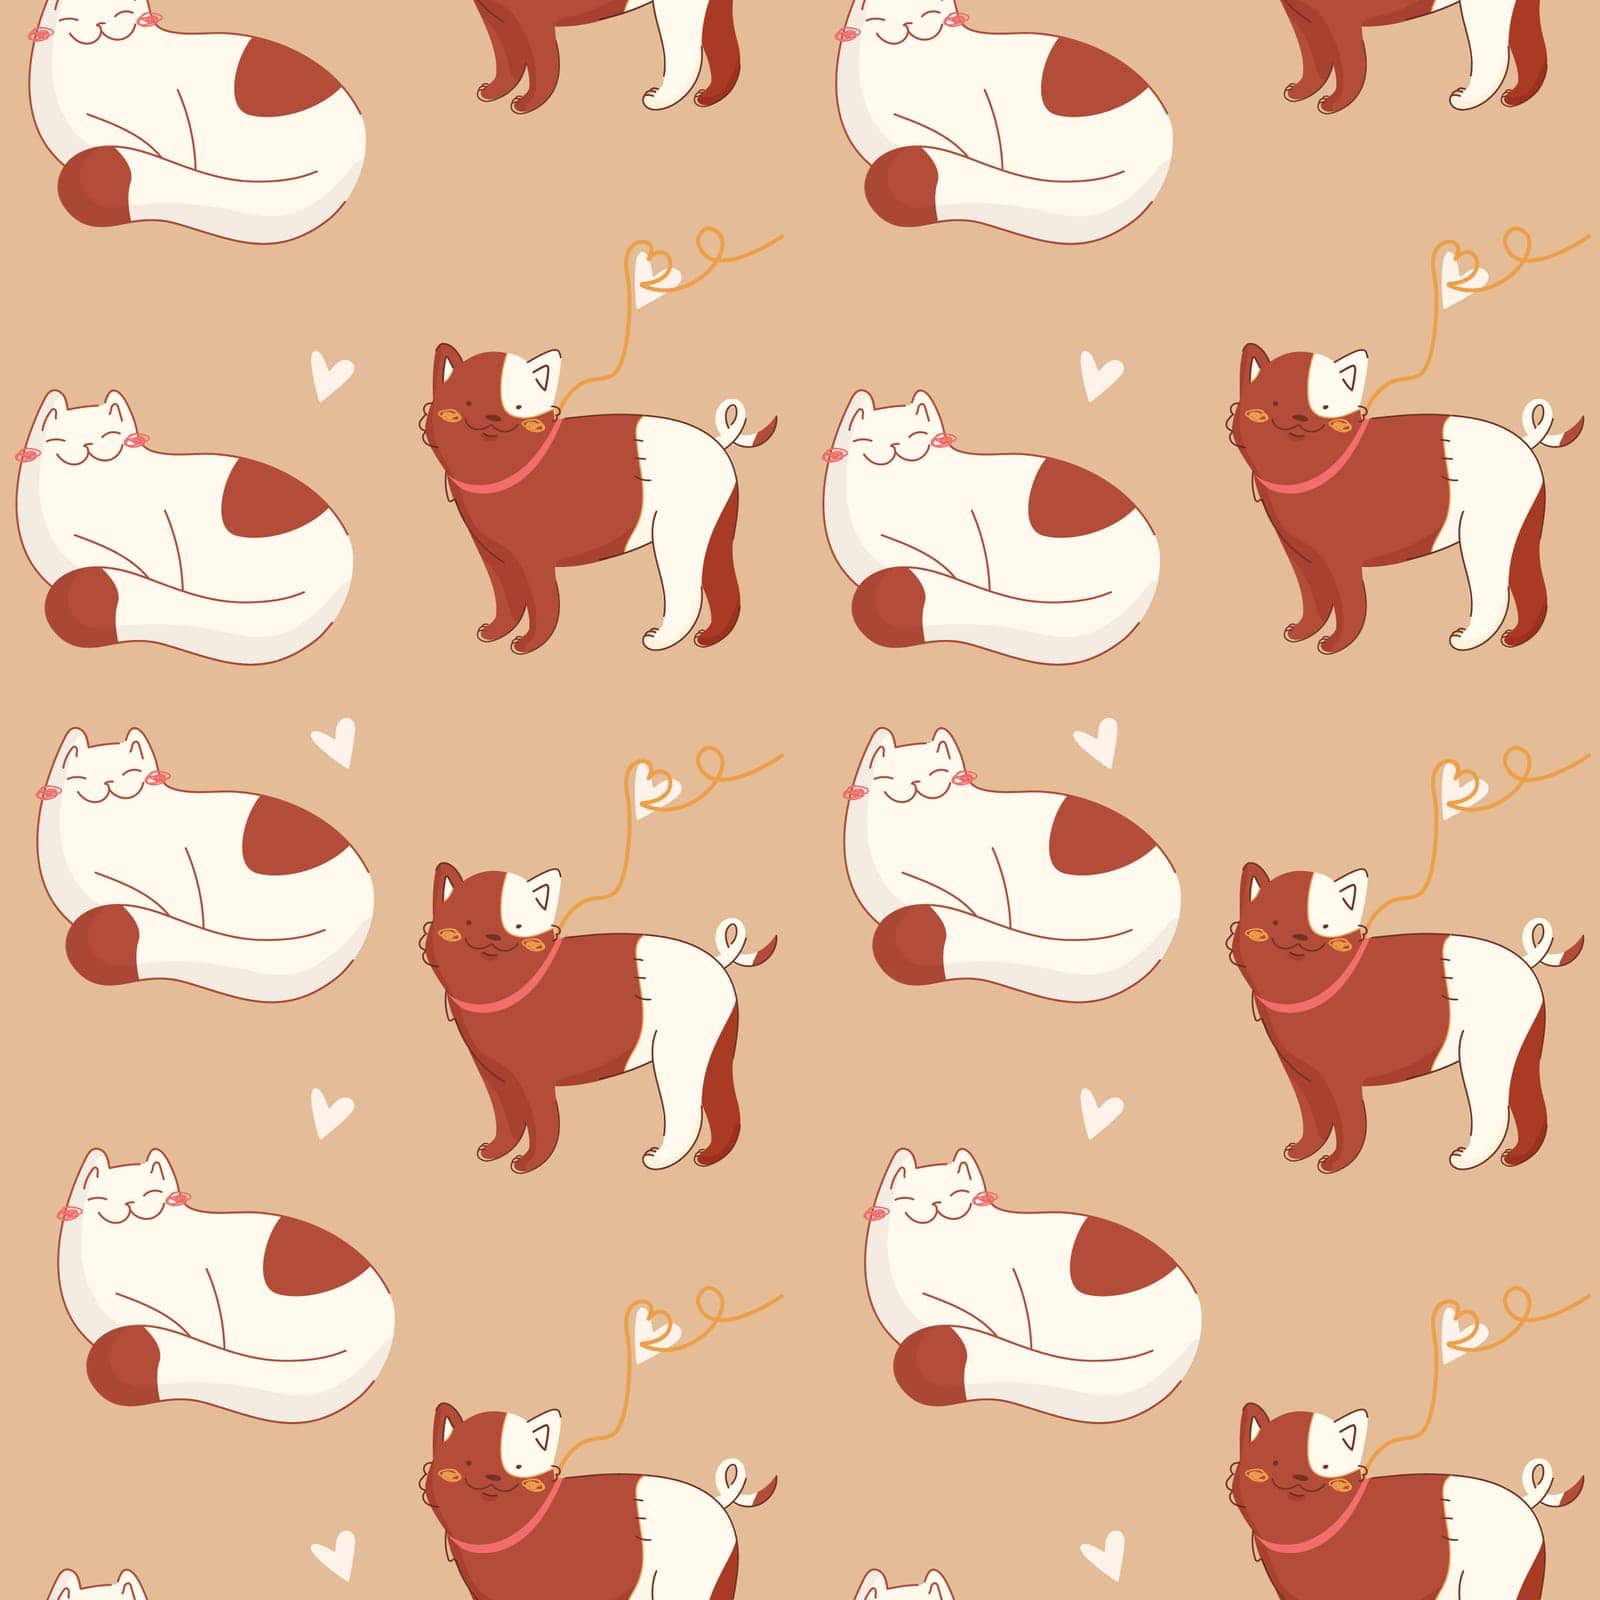 Pattern domestic cat and dog.Cute animals seamless pattern for packaging, print.Vector illustration.